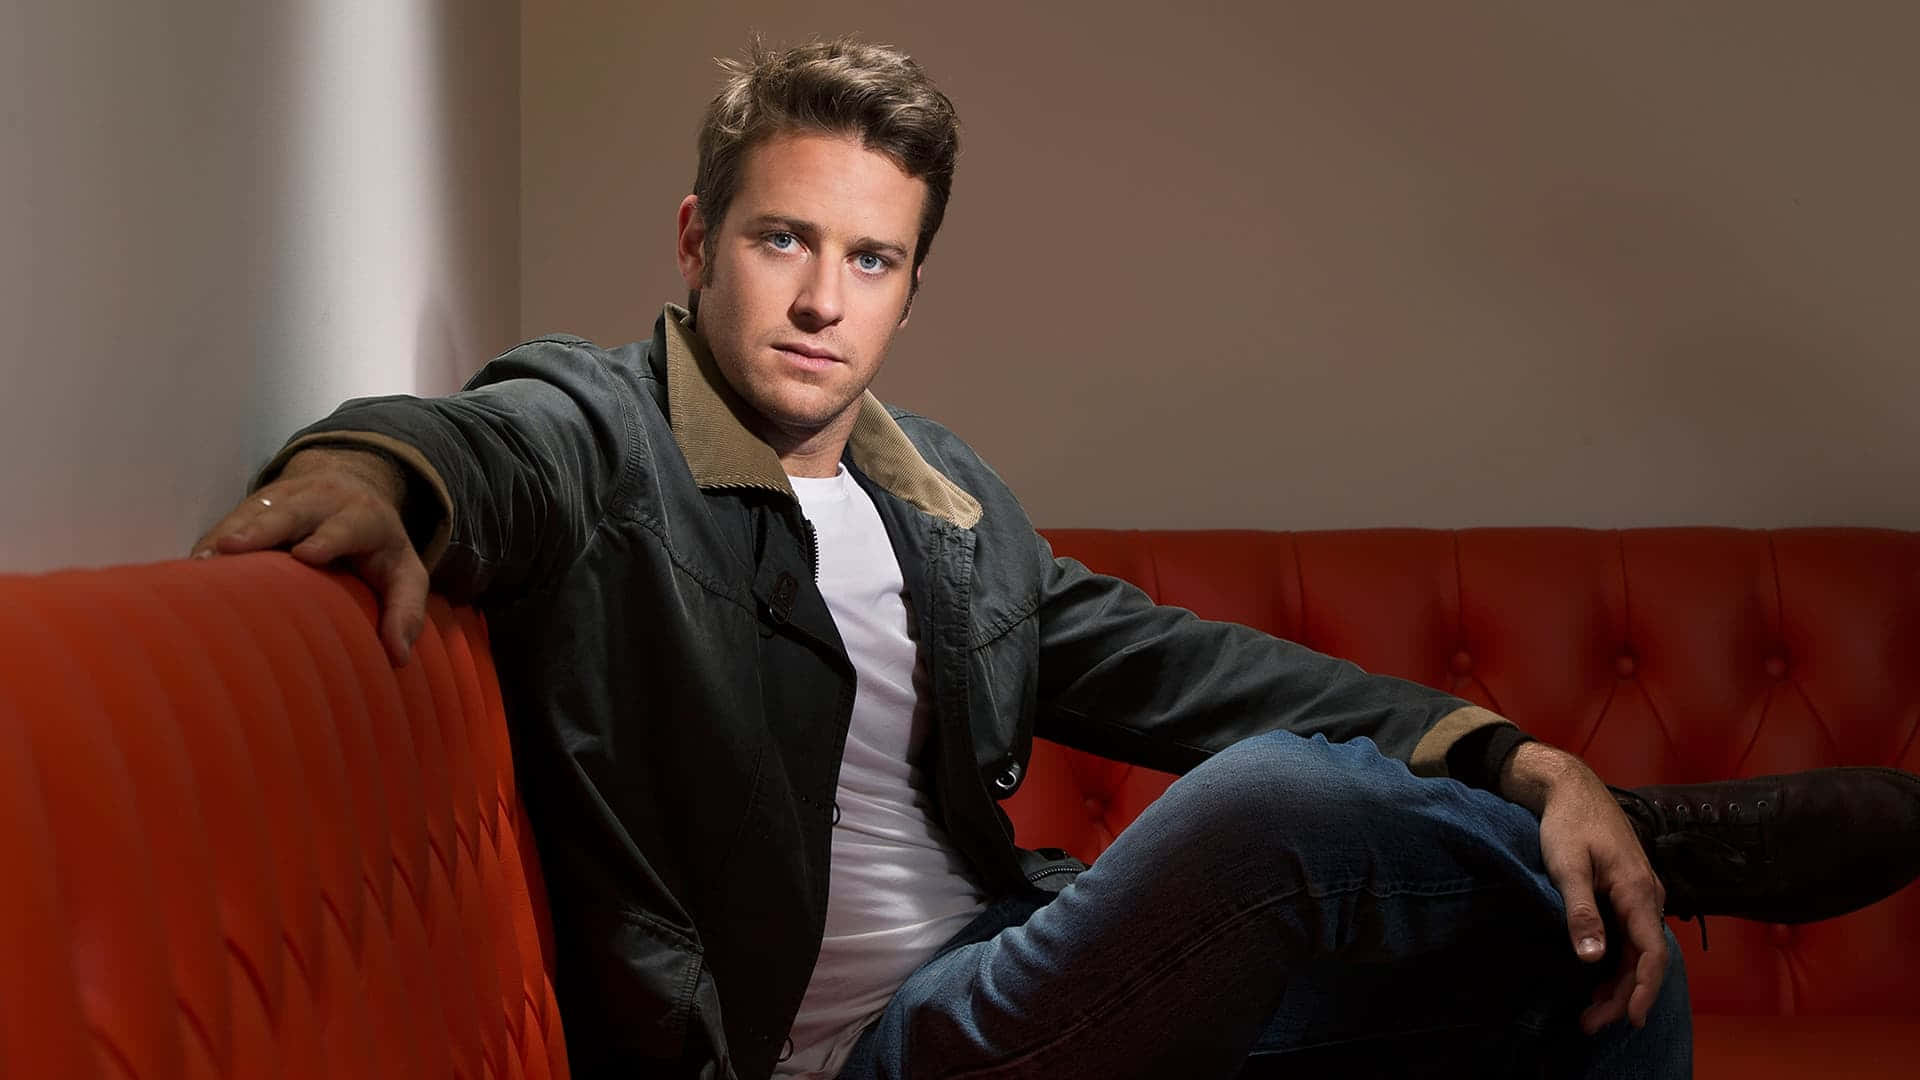 Actor Armie Hammer takes a break in-between takes on set.